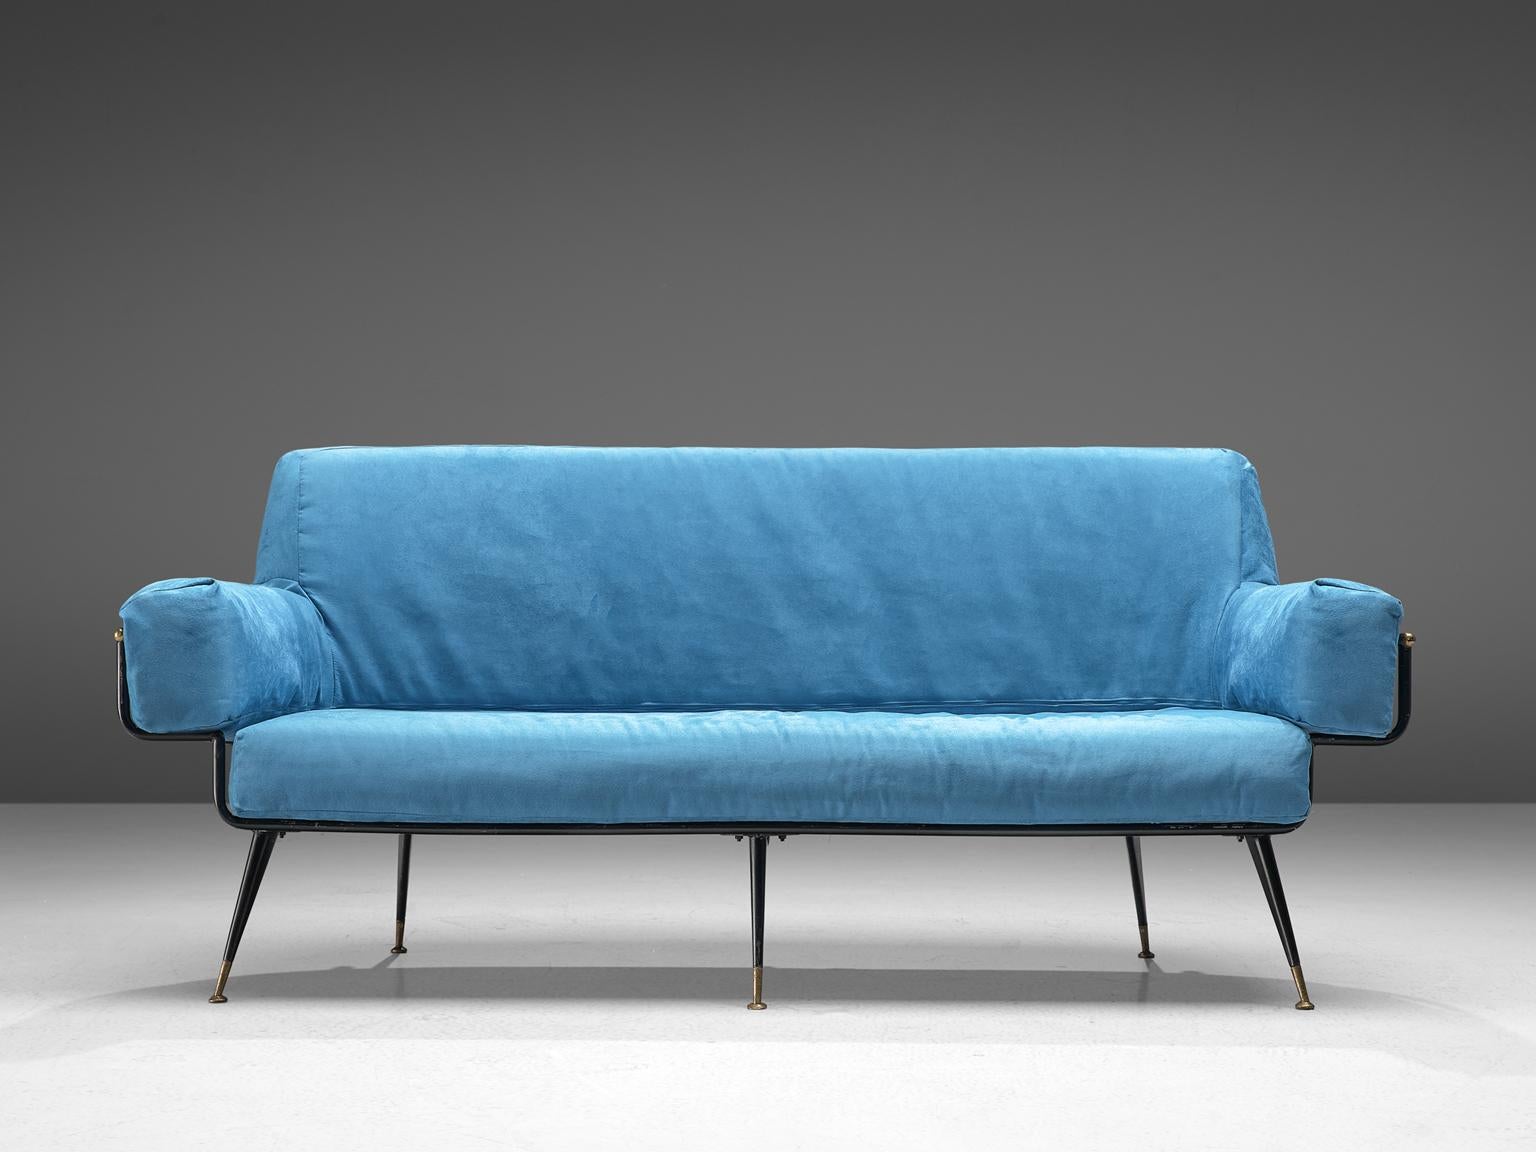 Valla Rito, sofa, fabric, metal and brass. Italy, 1950s.

This modern sofa, designed by Valla Rito, features a metal frame that holds the seat in its place. The legs are tall and slender and are made of brass on the bottom half and black metal on